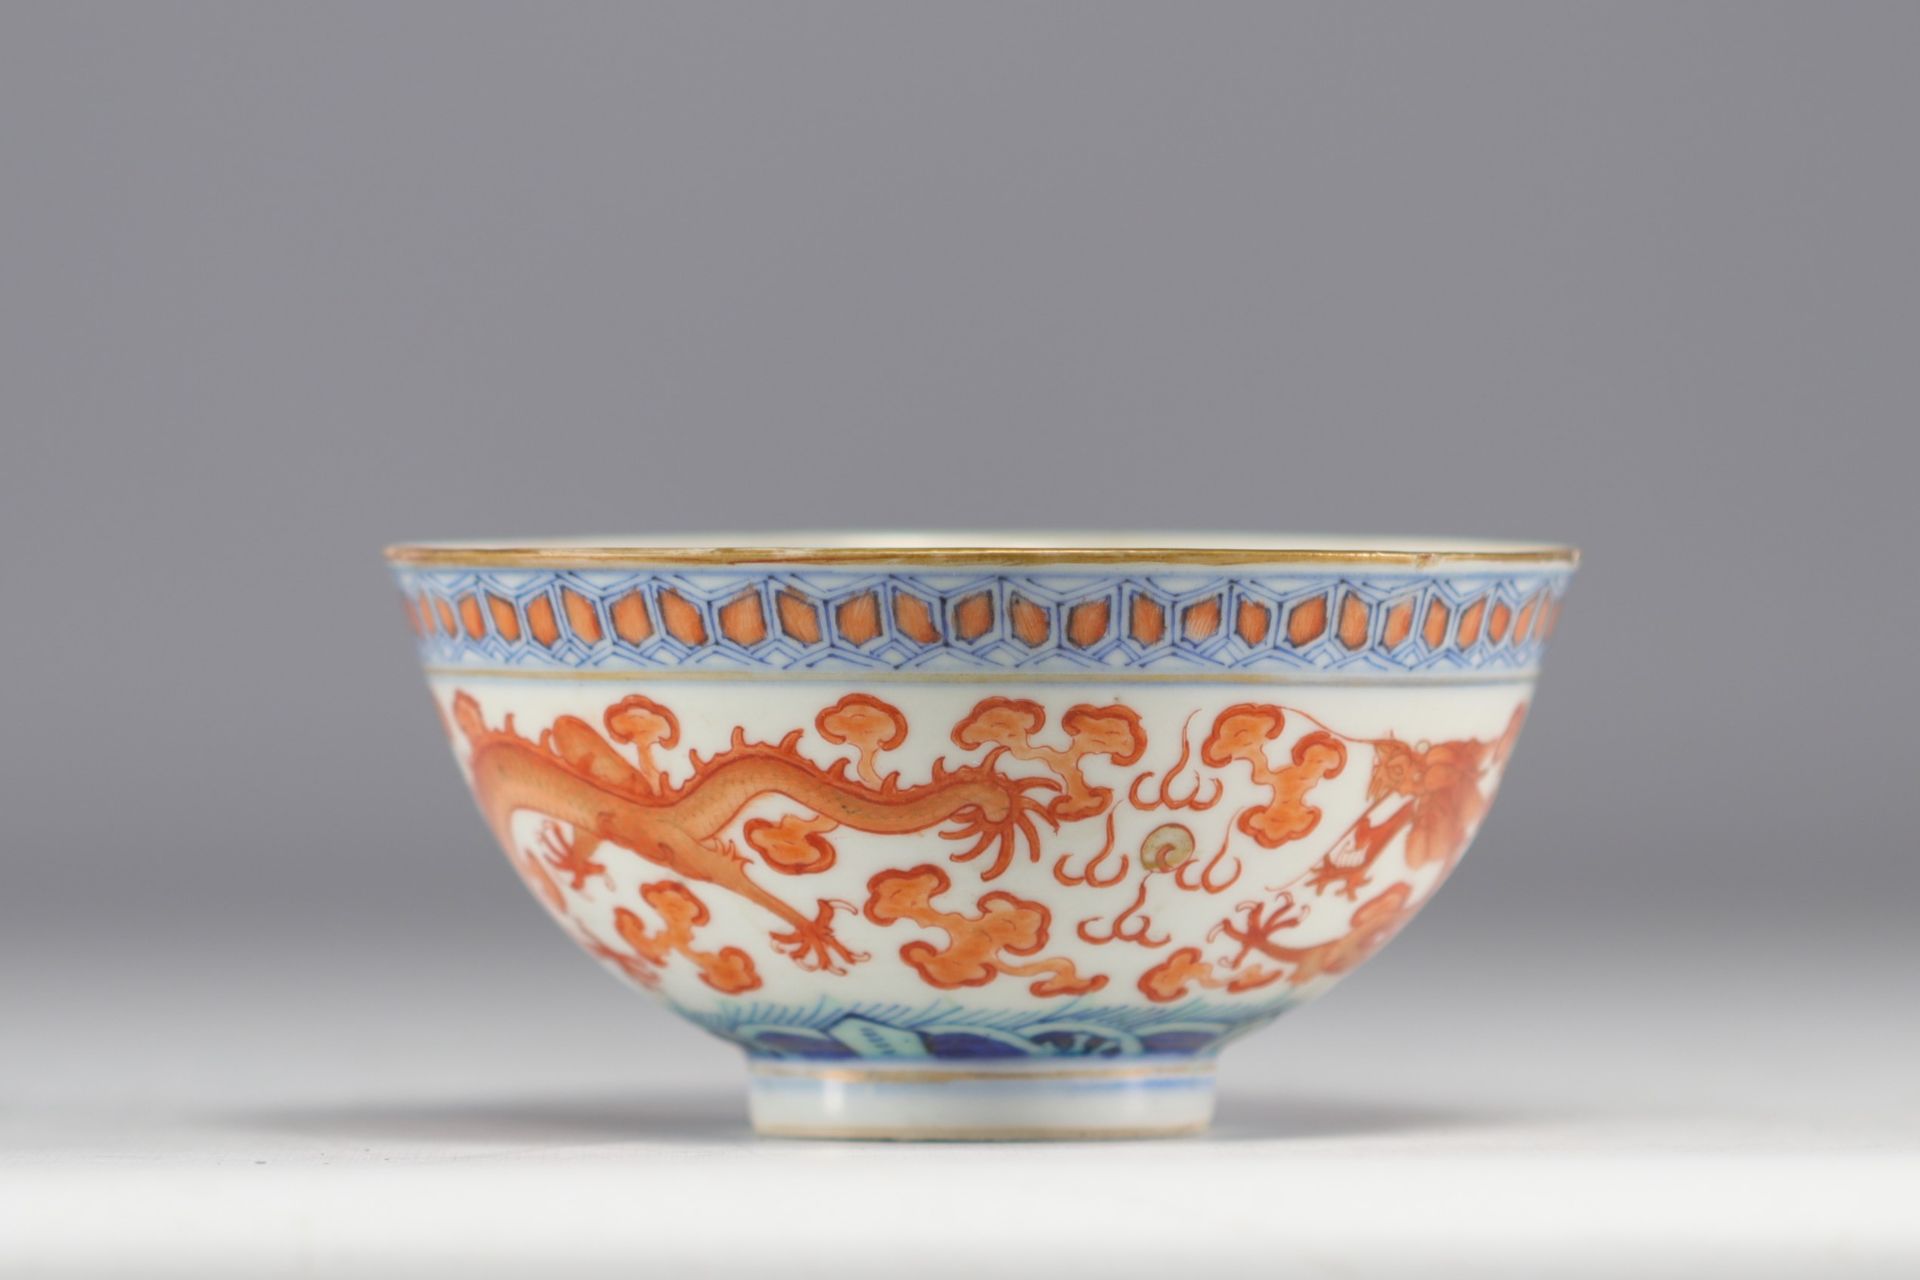 China - Porcelain bowl decorated with dragons with five claws, blue mark under the piece. - Image 2 of 6